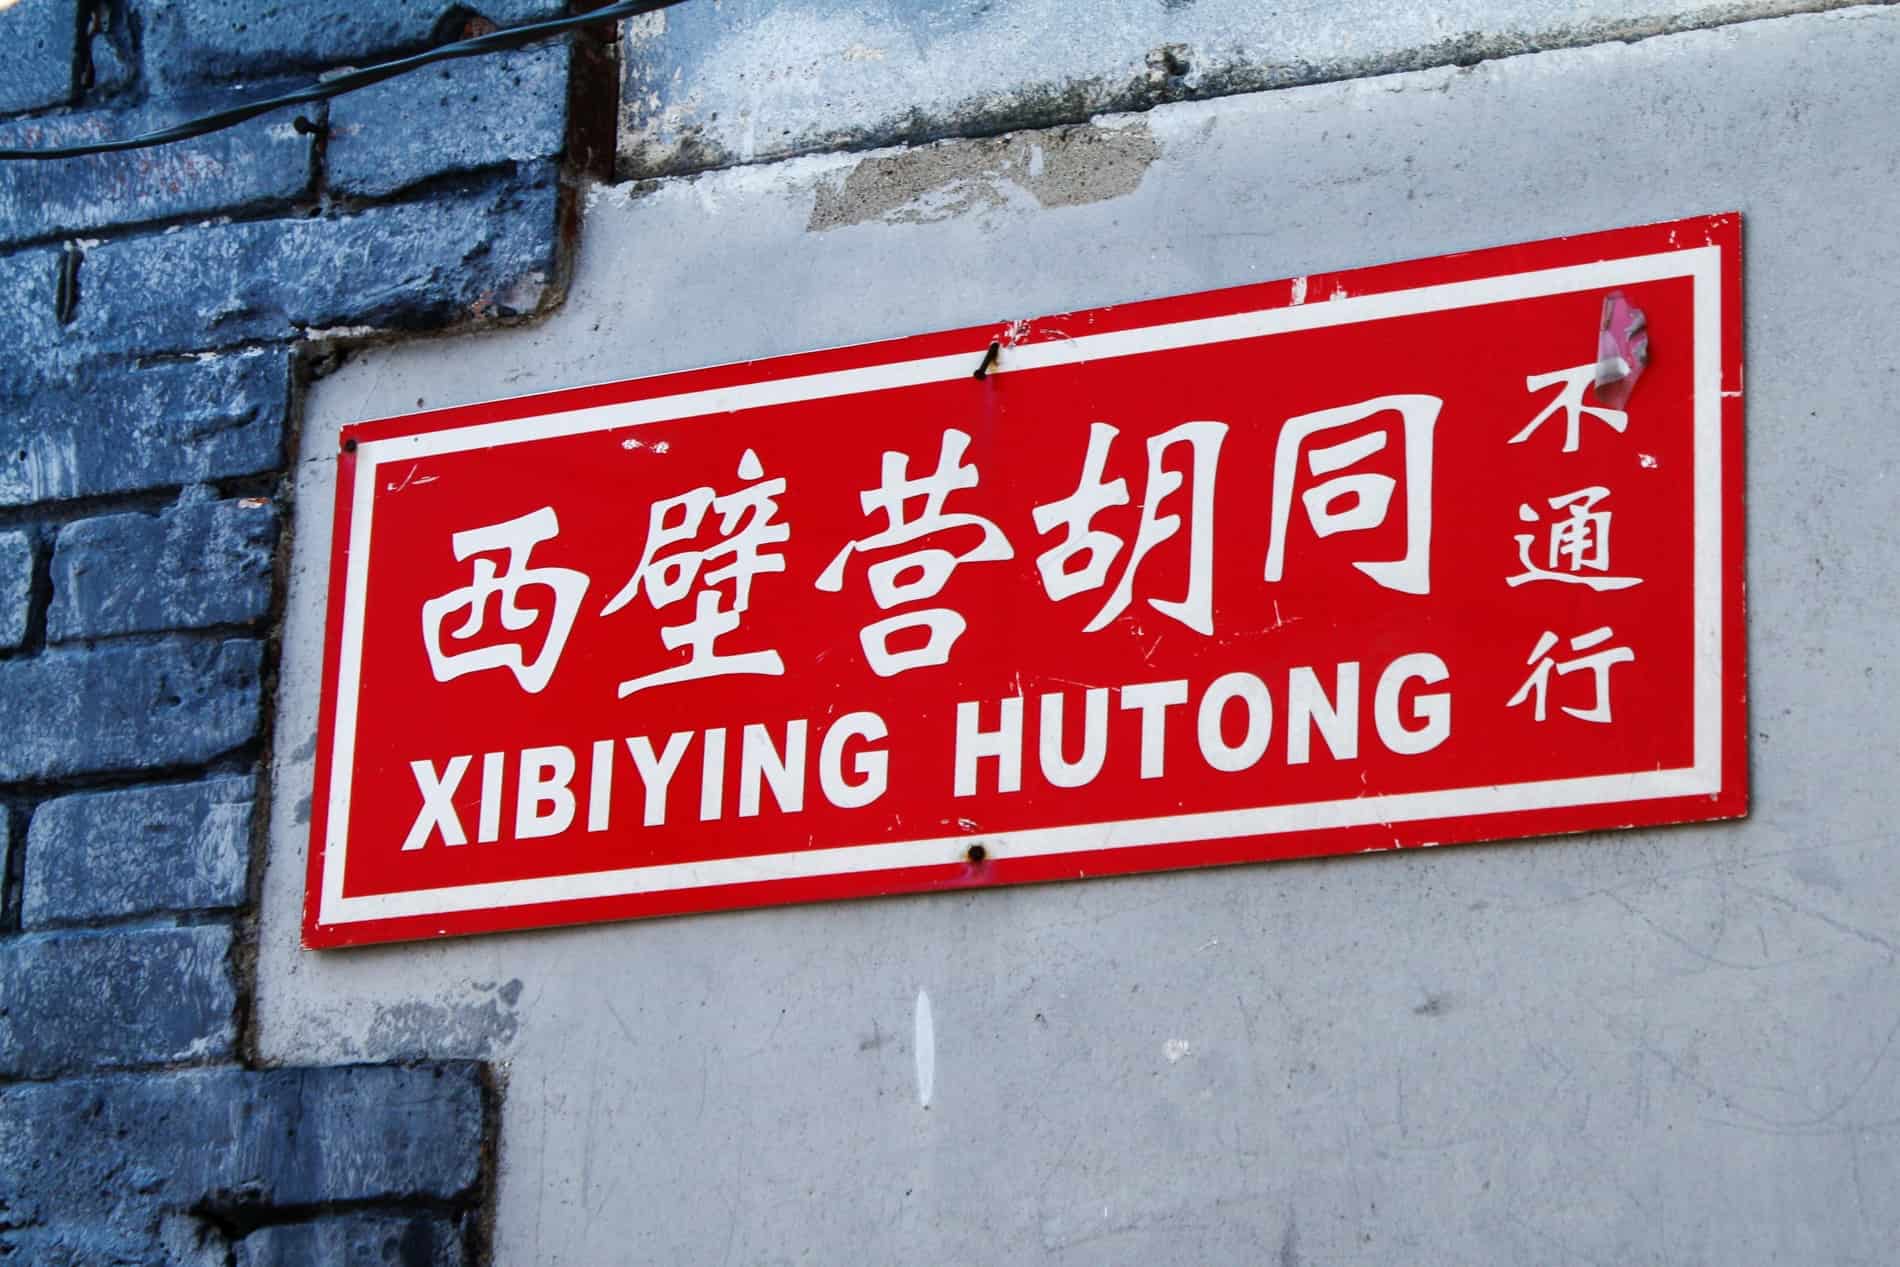 A red street sign with white writing for a Hutong in China